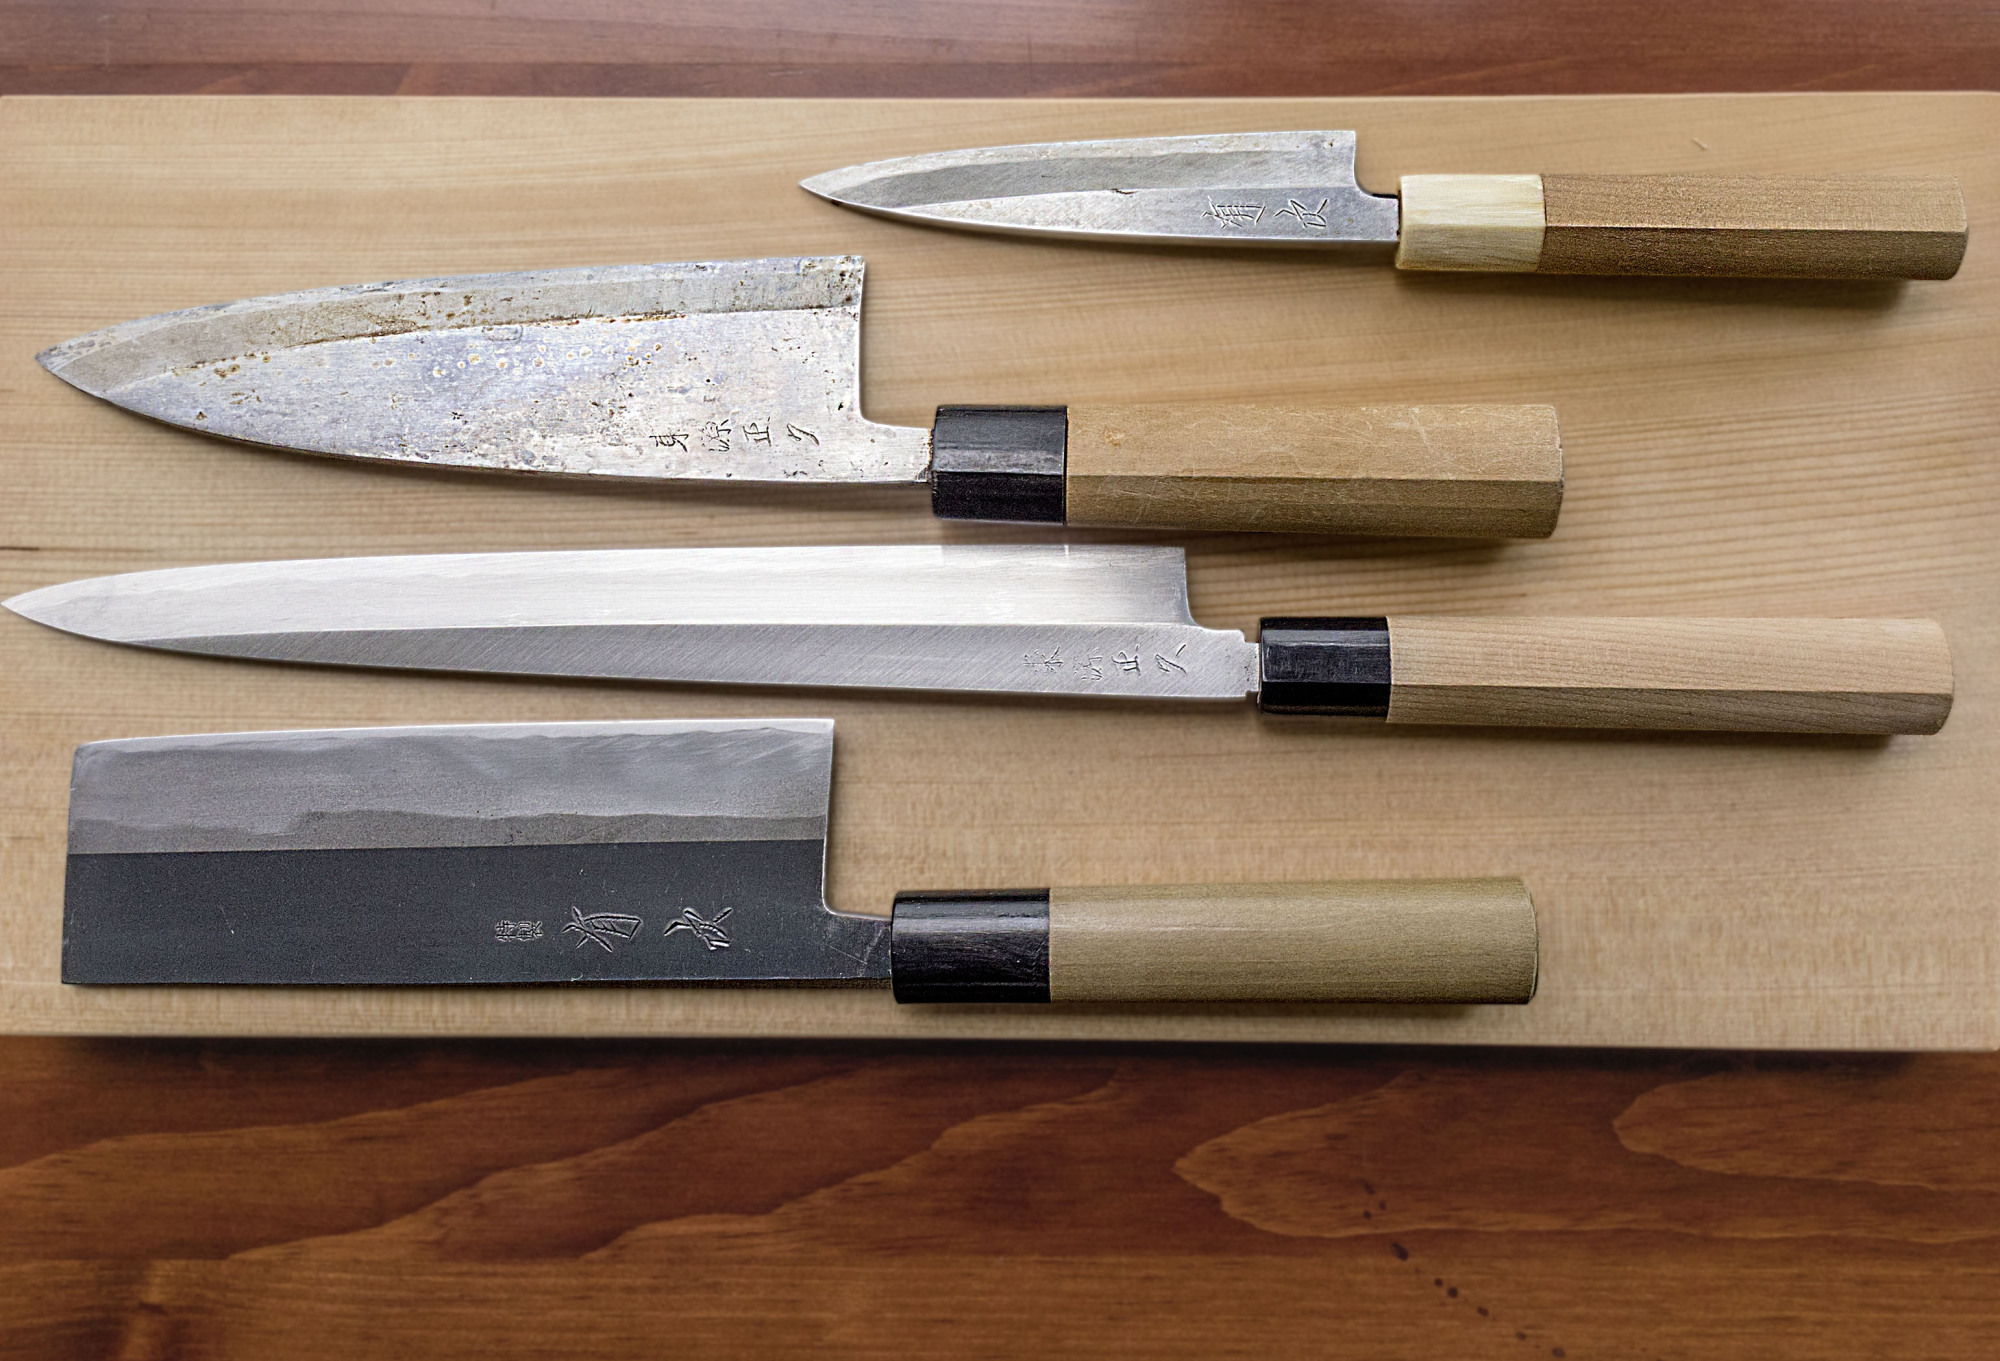 What Is The Correct Angle To Sharpen Japanese Knives?